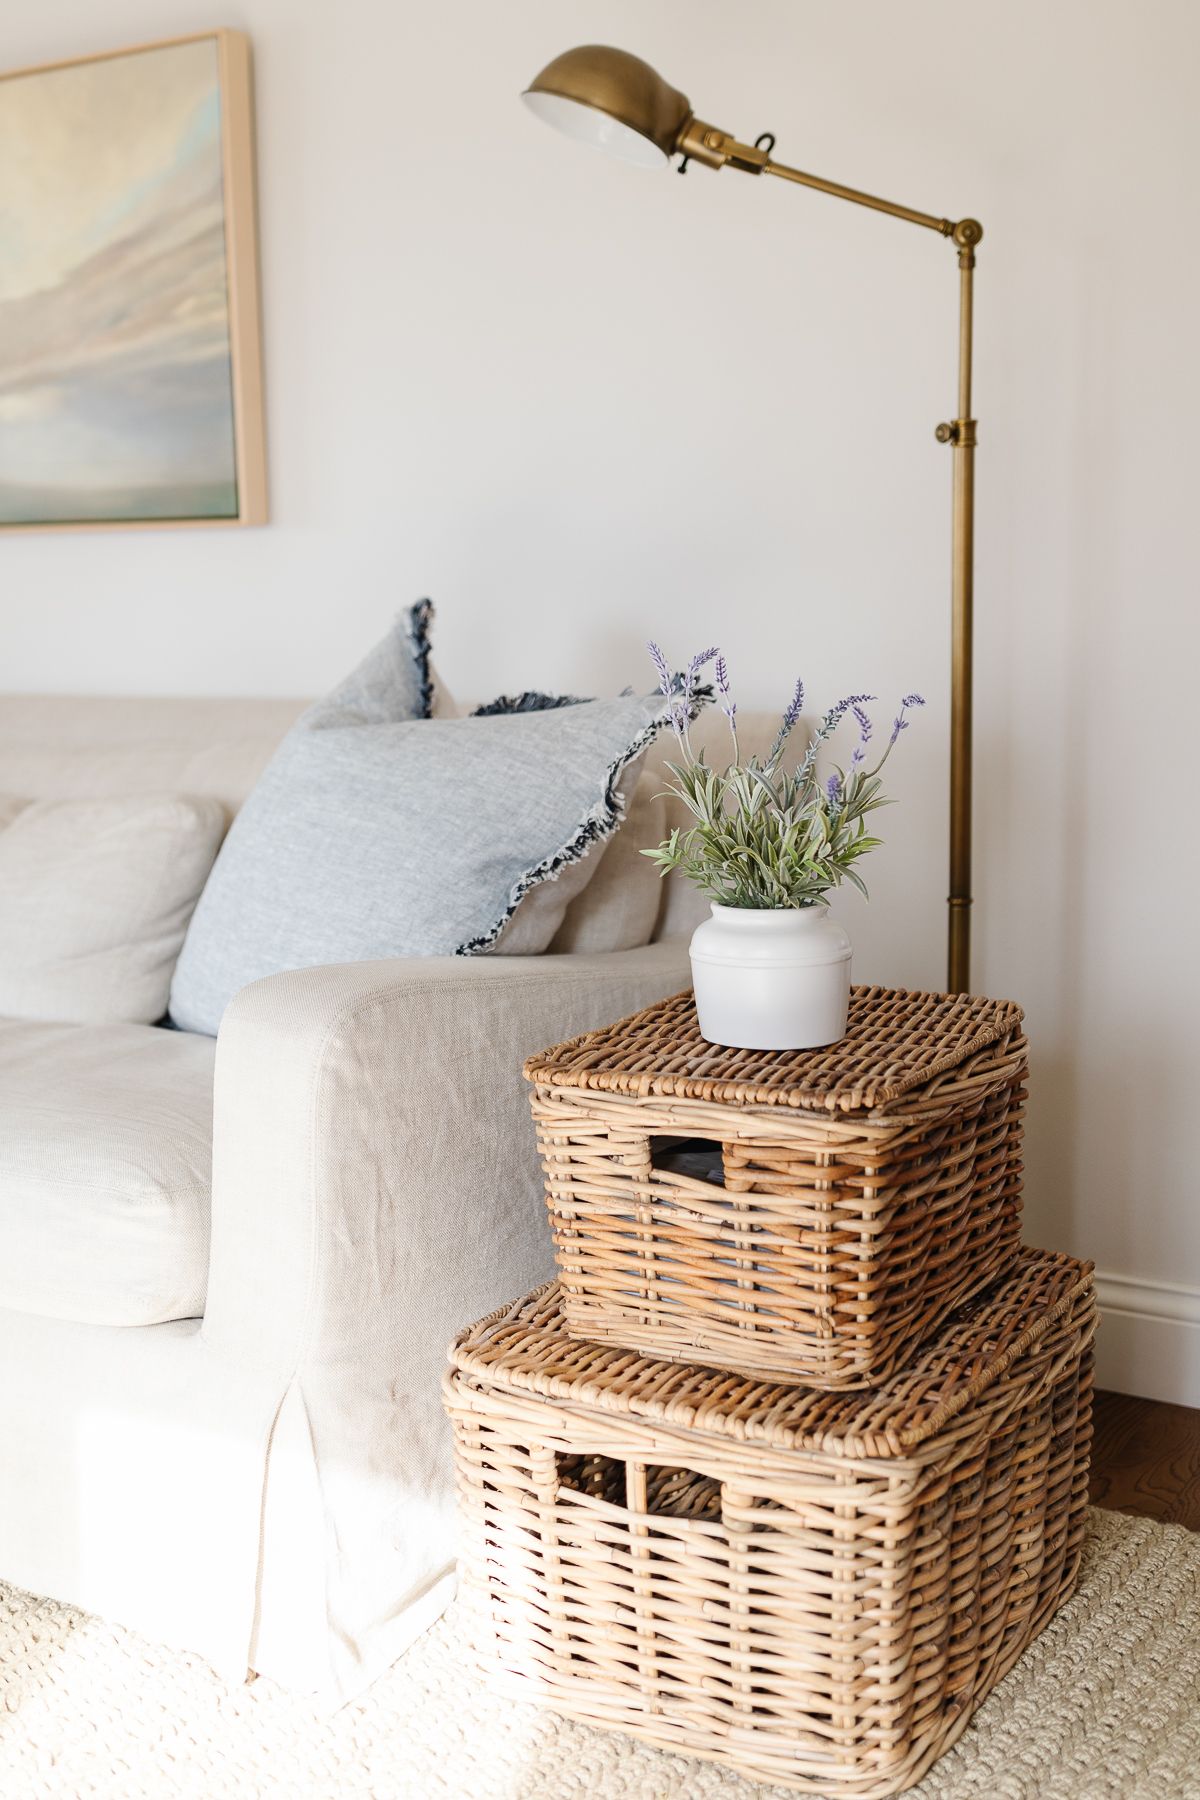 A linen sofa with baskets for an end table in a room painted in Zurich White